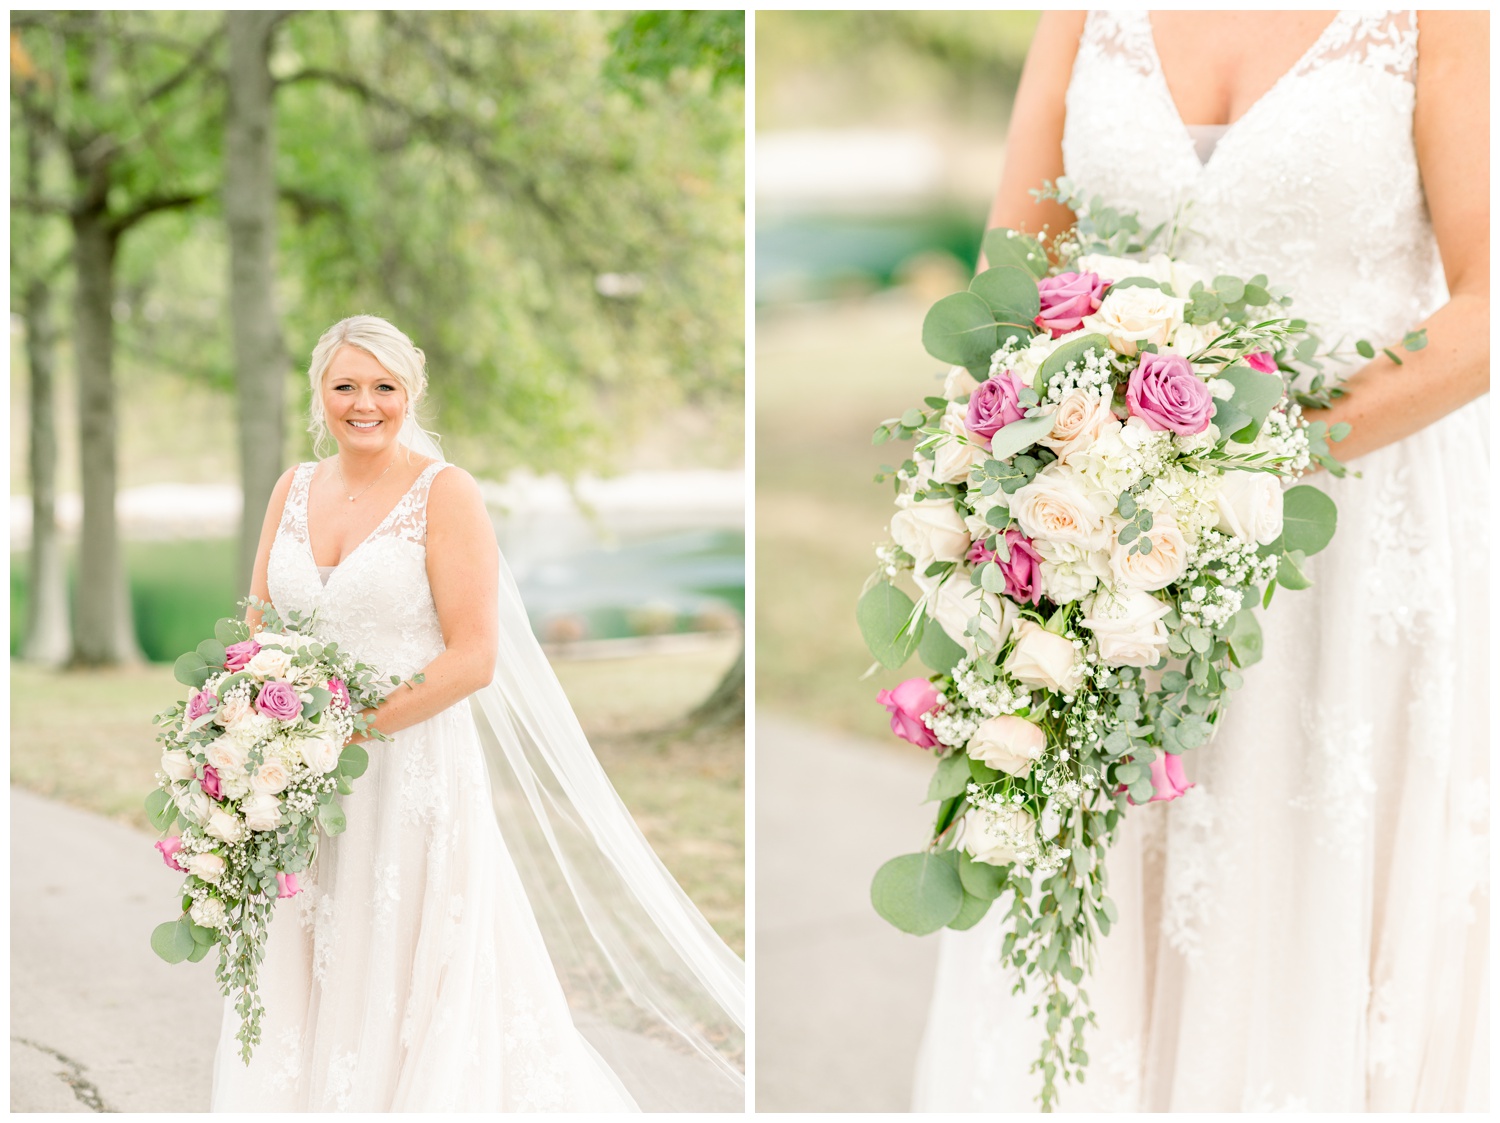 Bridal Portraits at Home for Backyard Wedding in Northern Kentucky